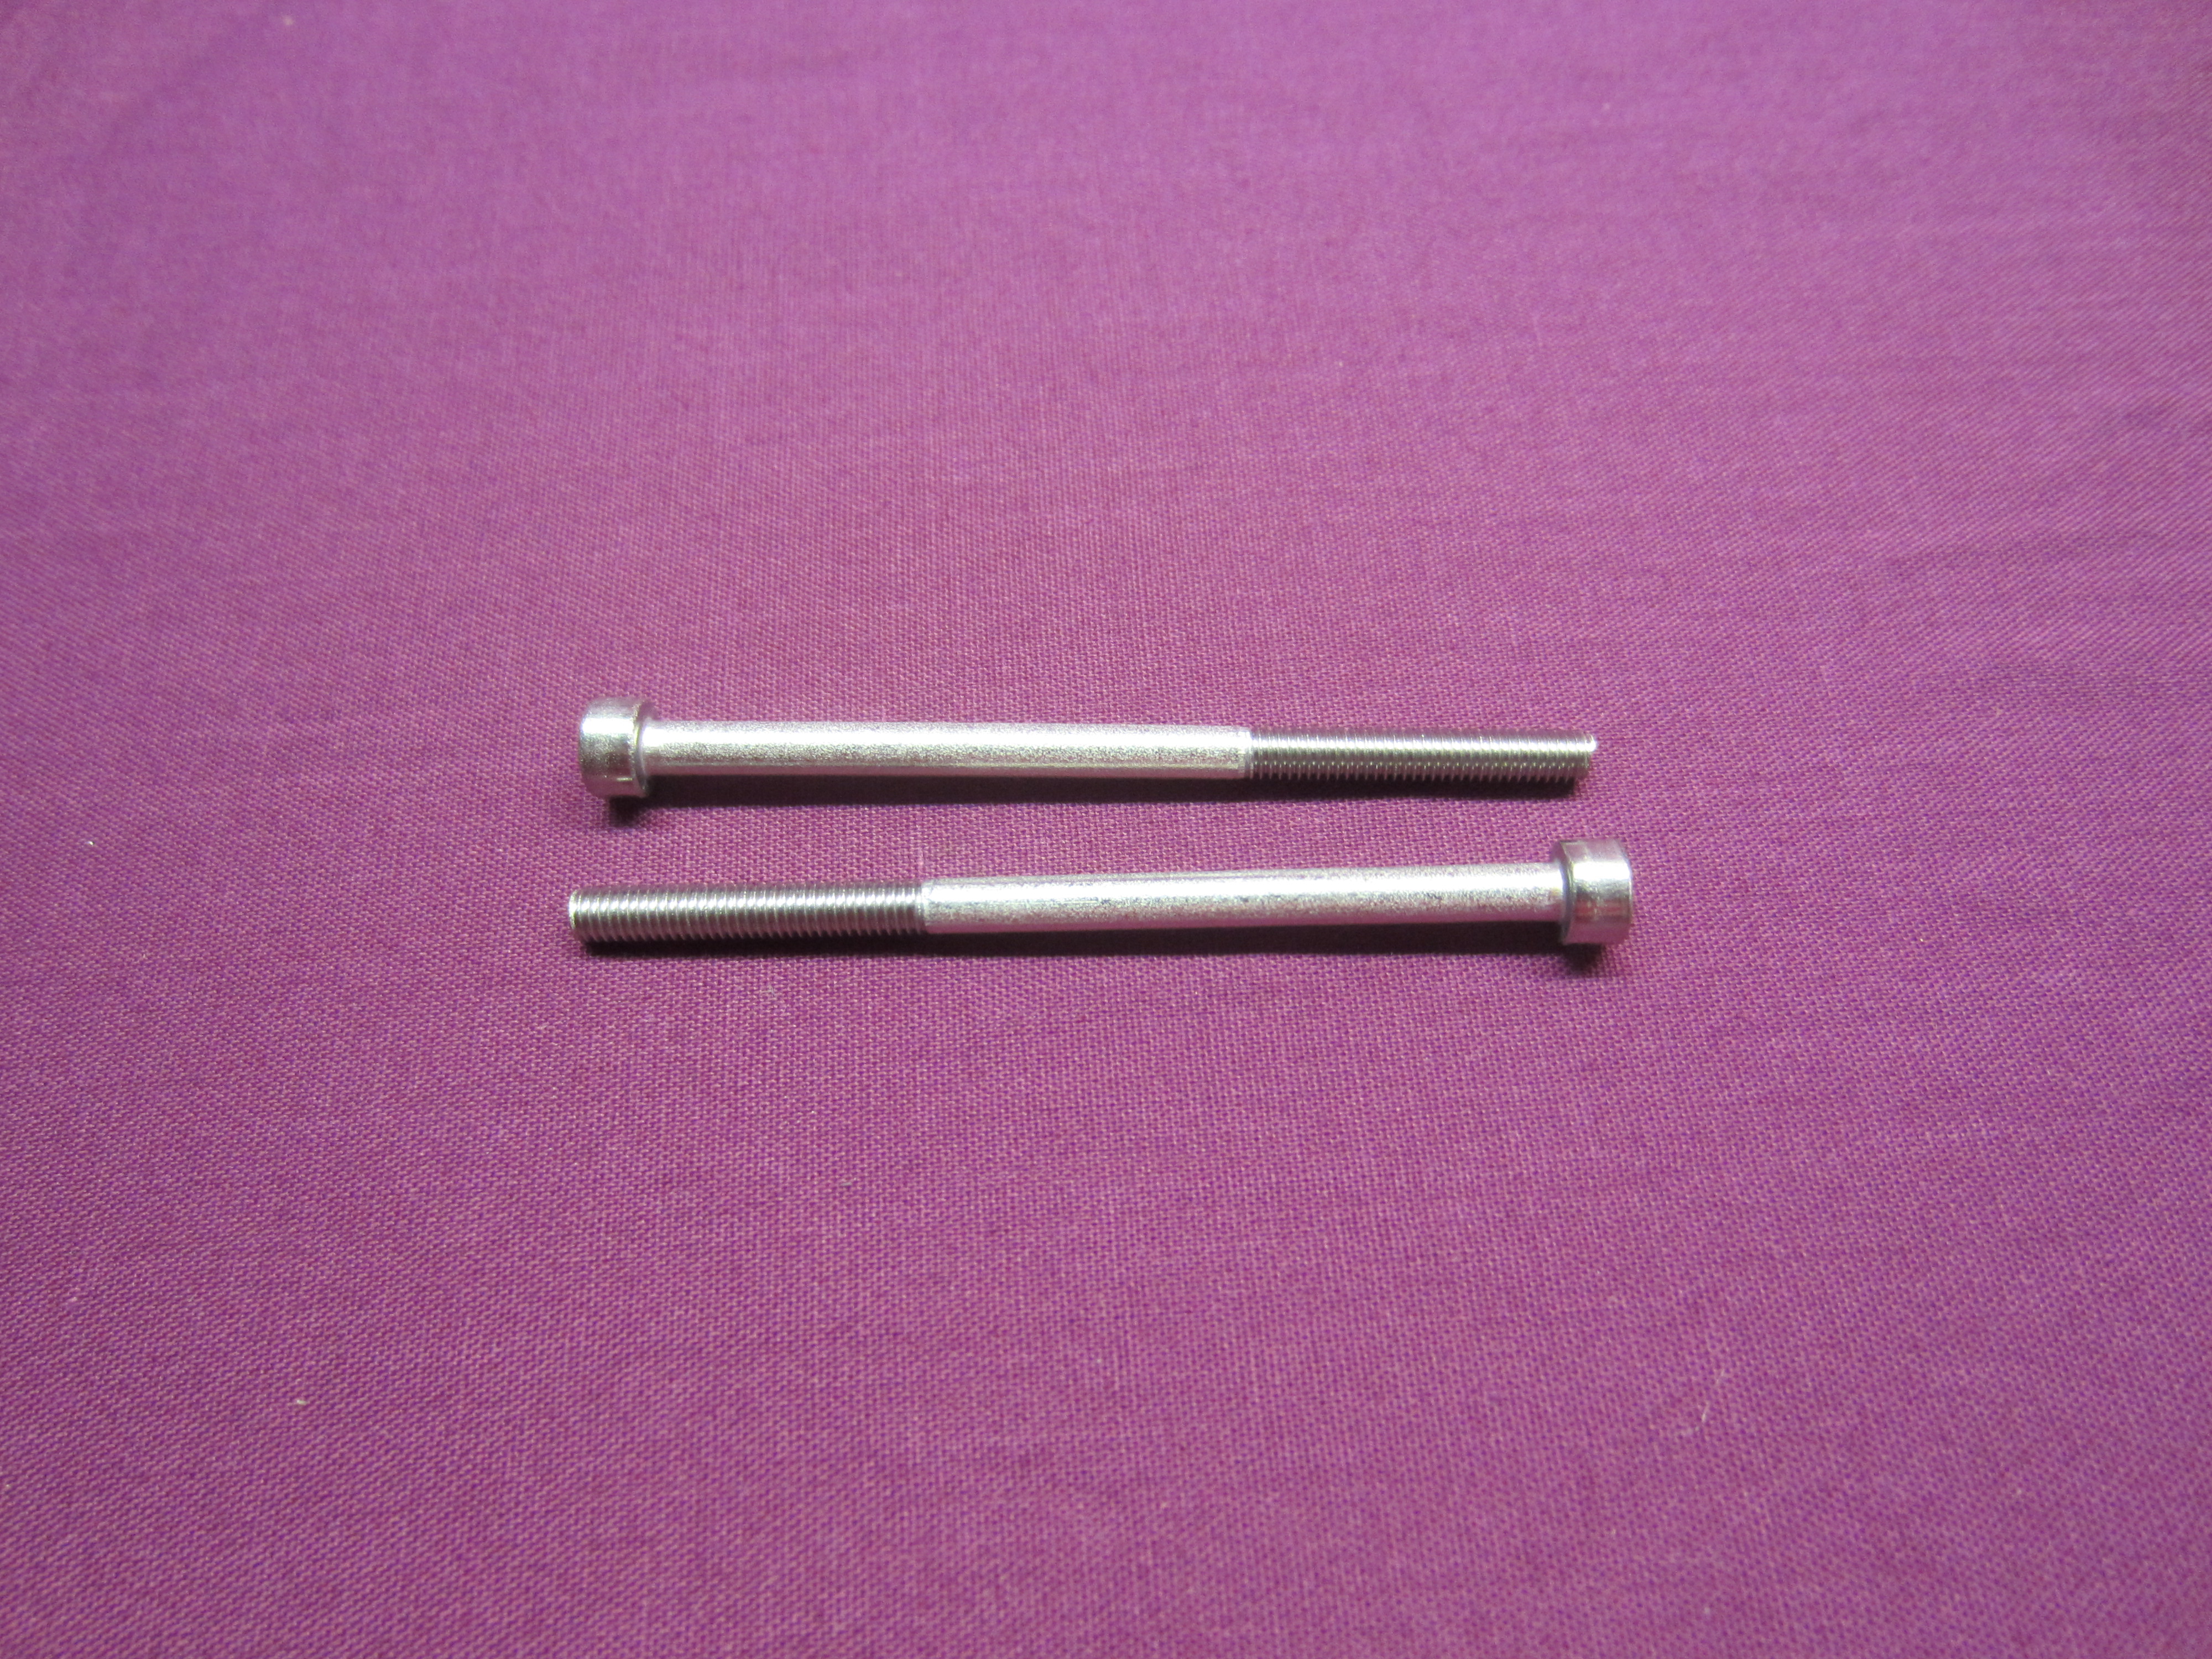 M3x50, Stainless Steel V2A, 2 pcs